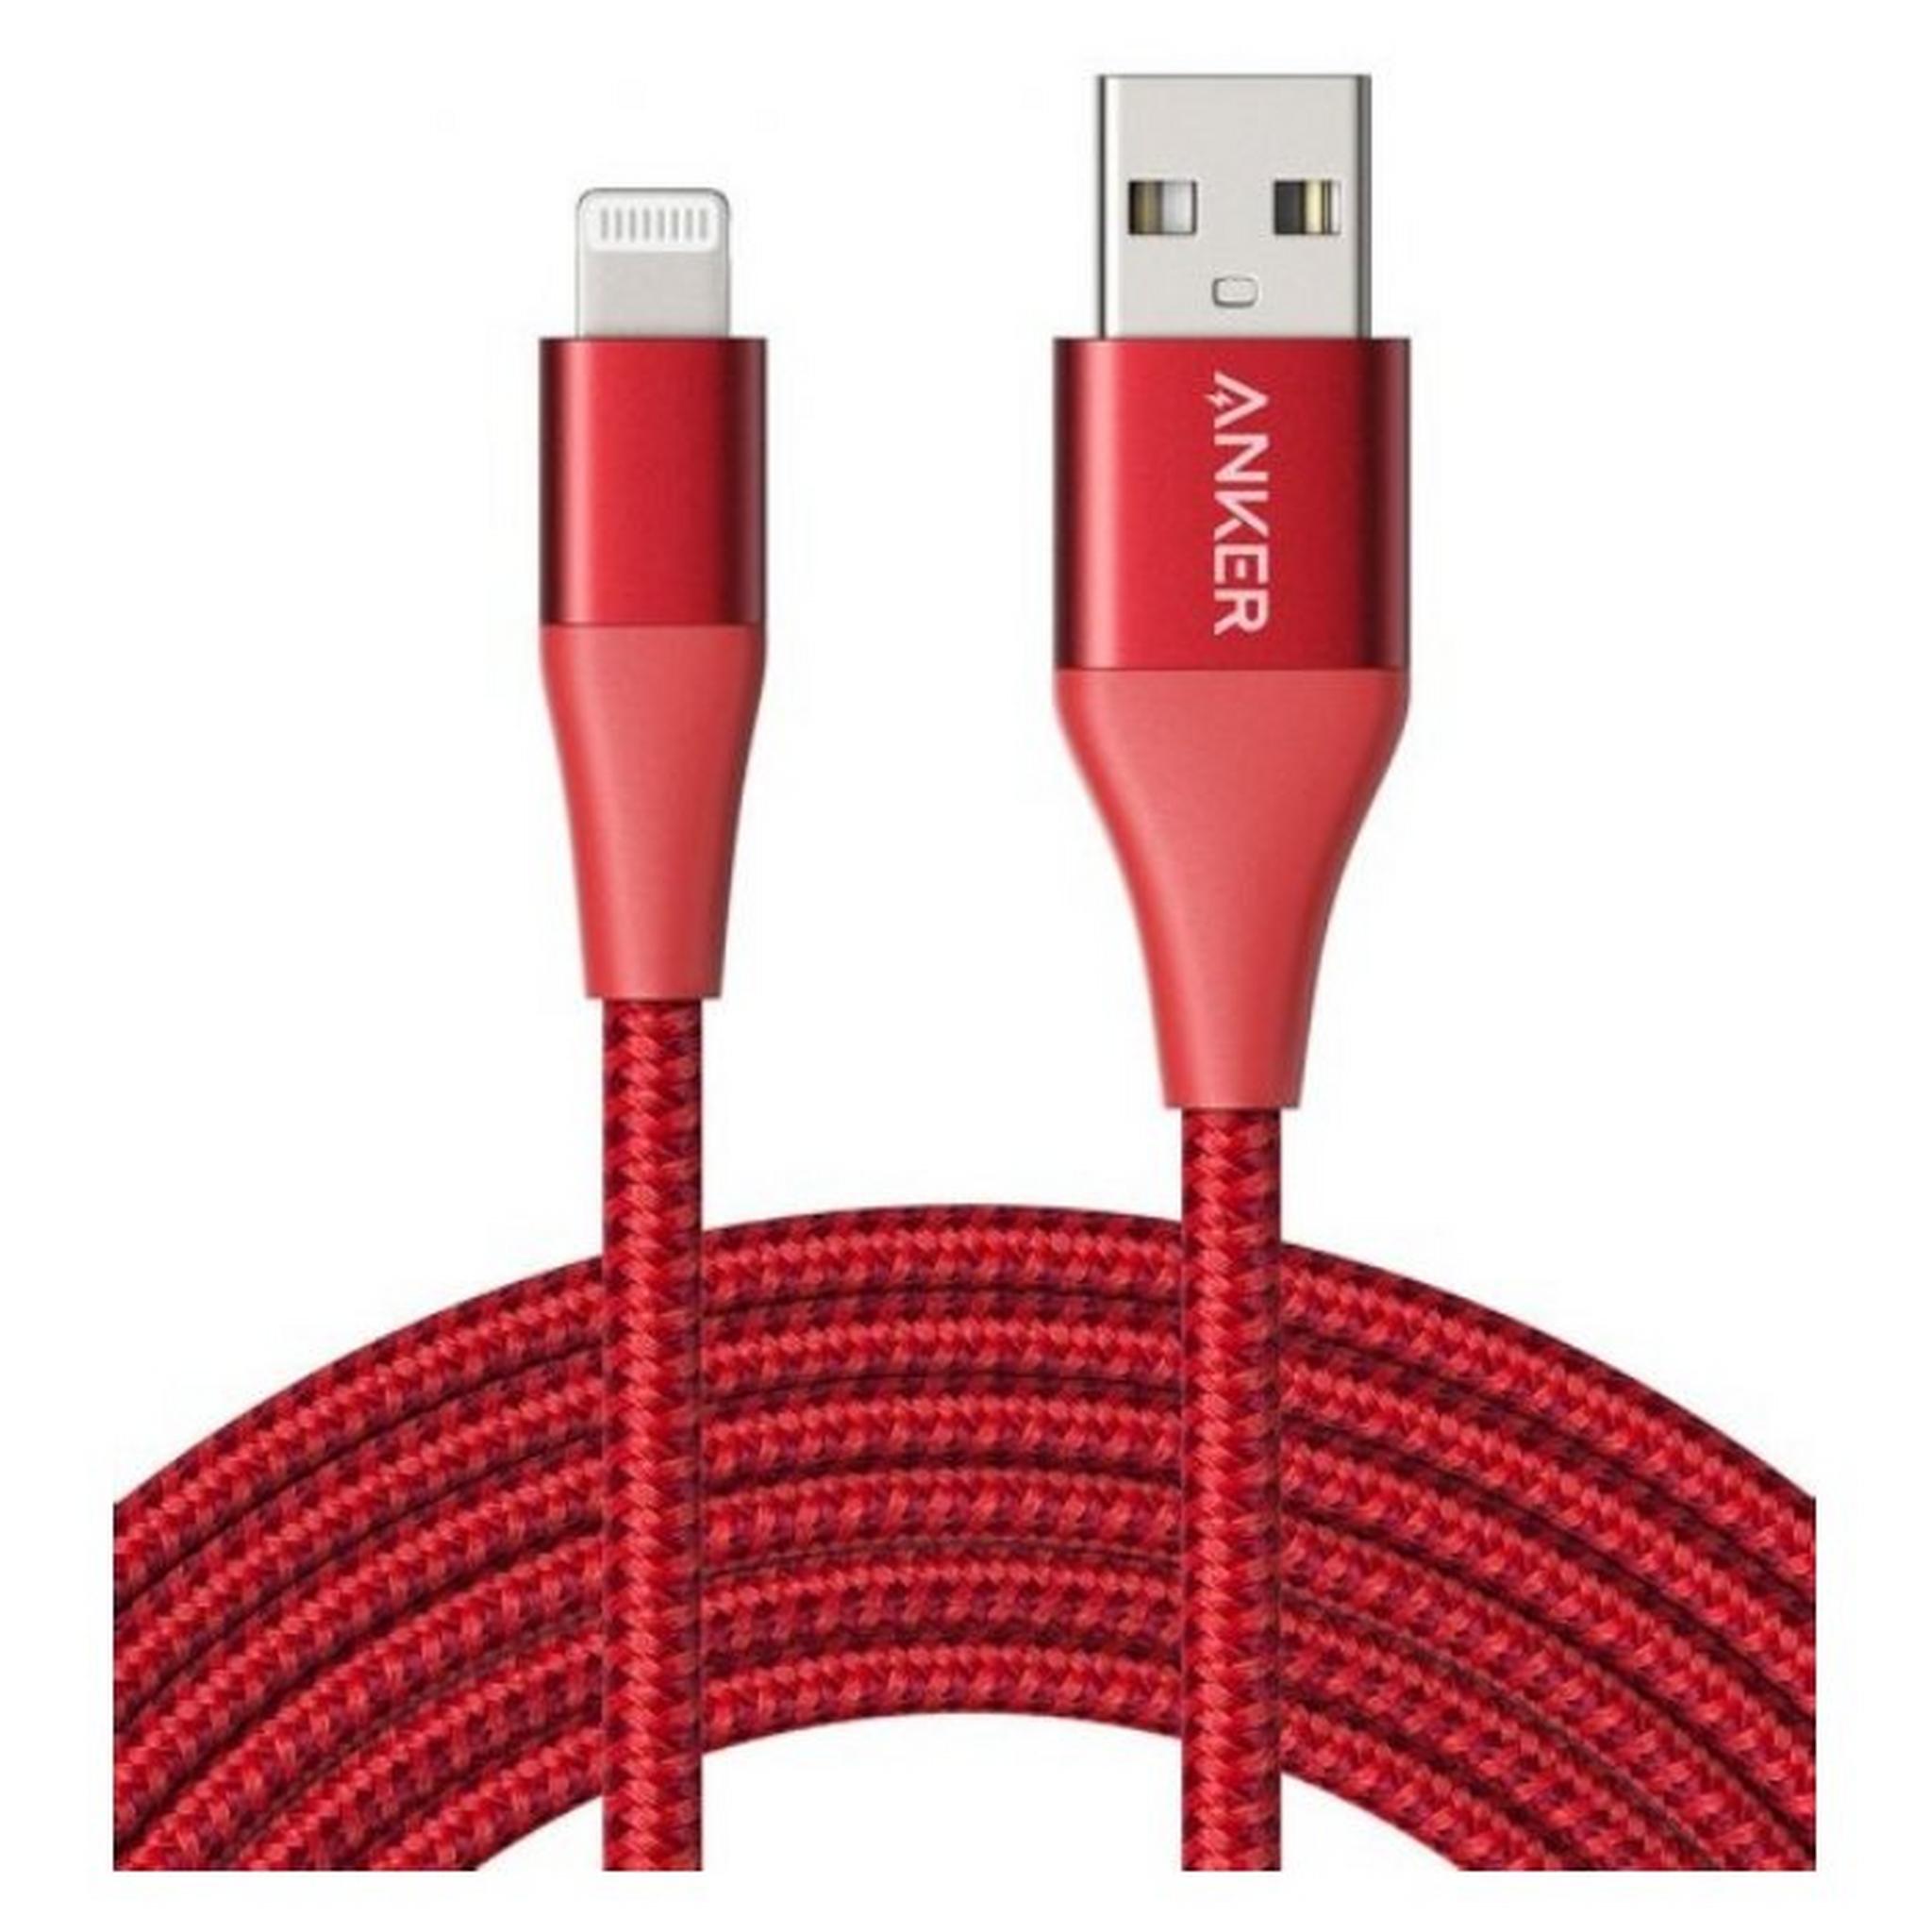 Anker PowerLine+ II Lightning 3m Cable - Red